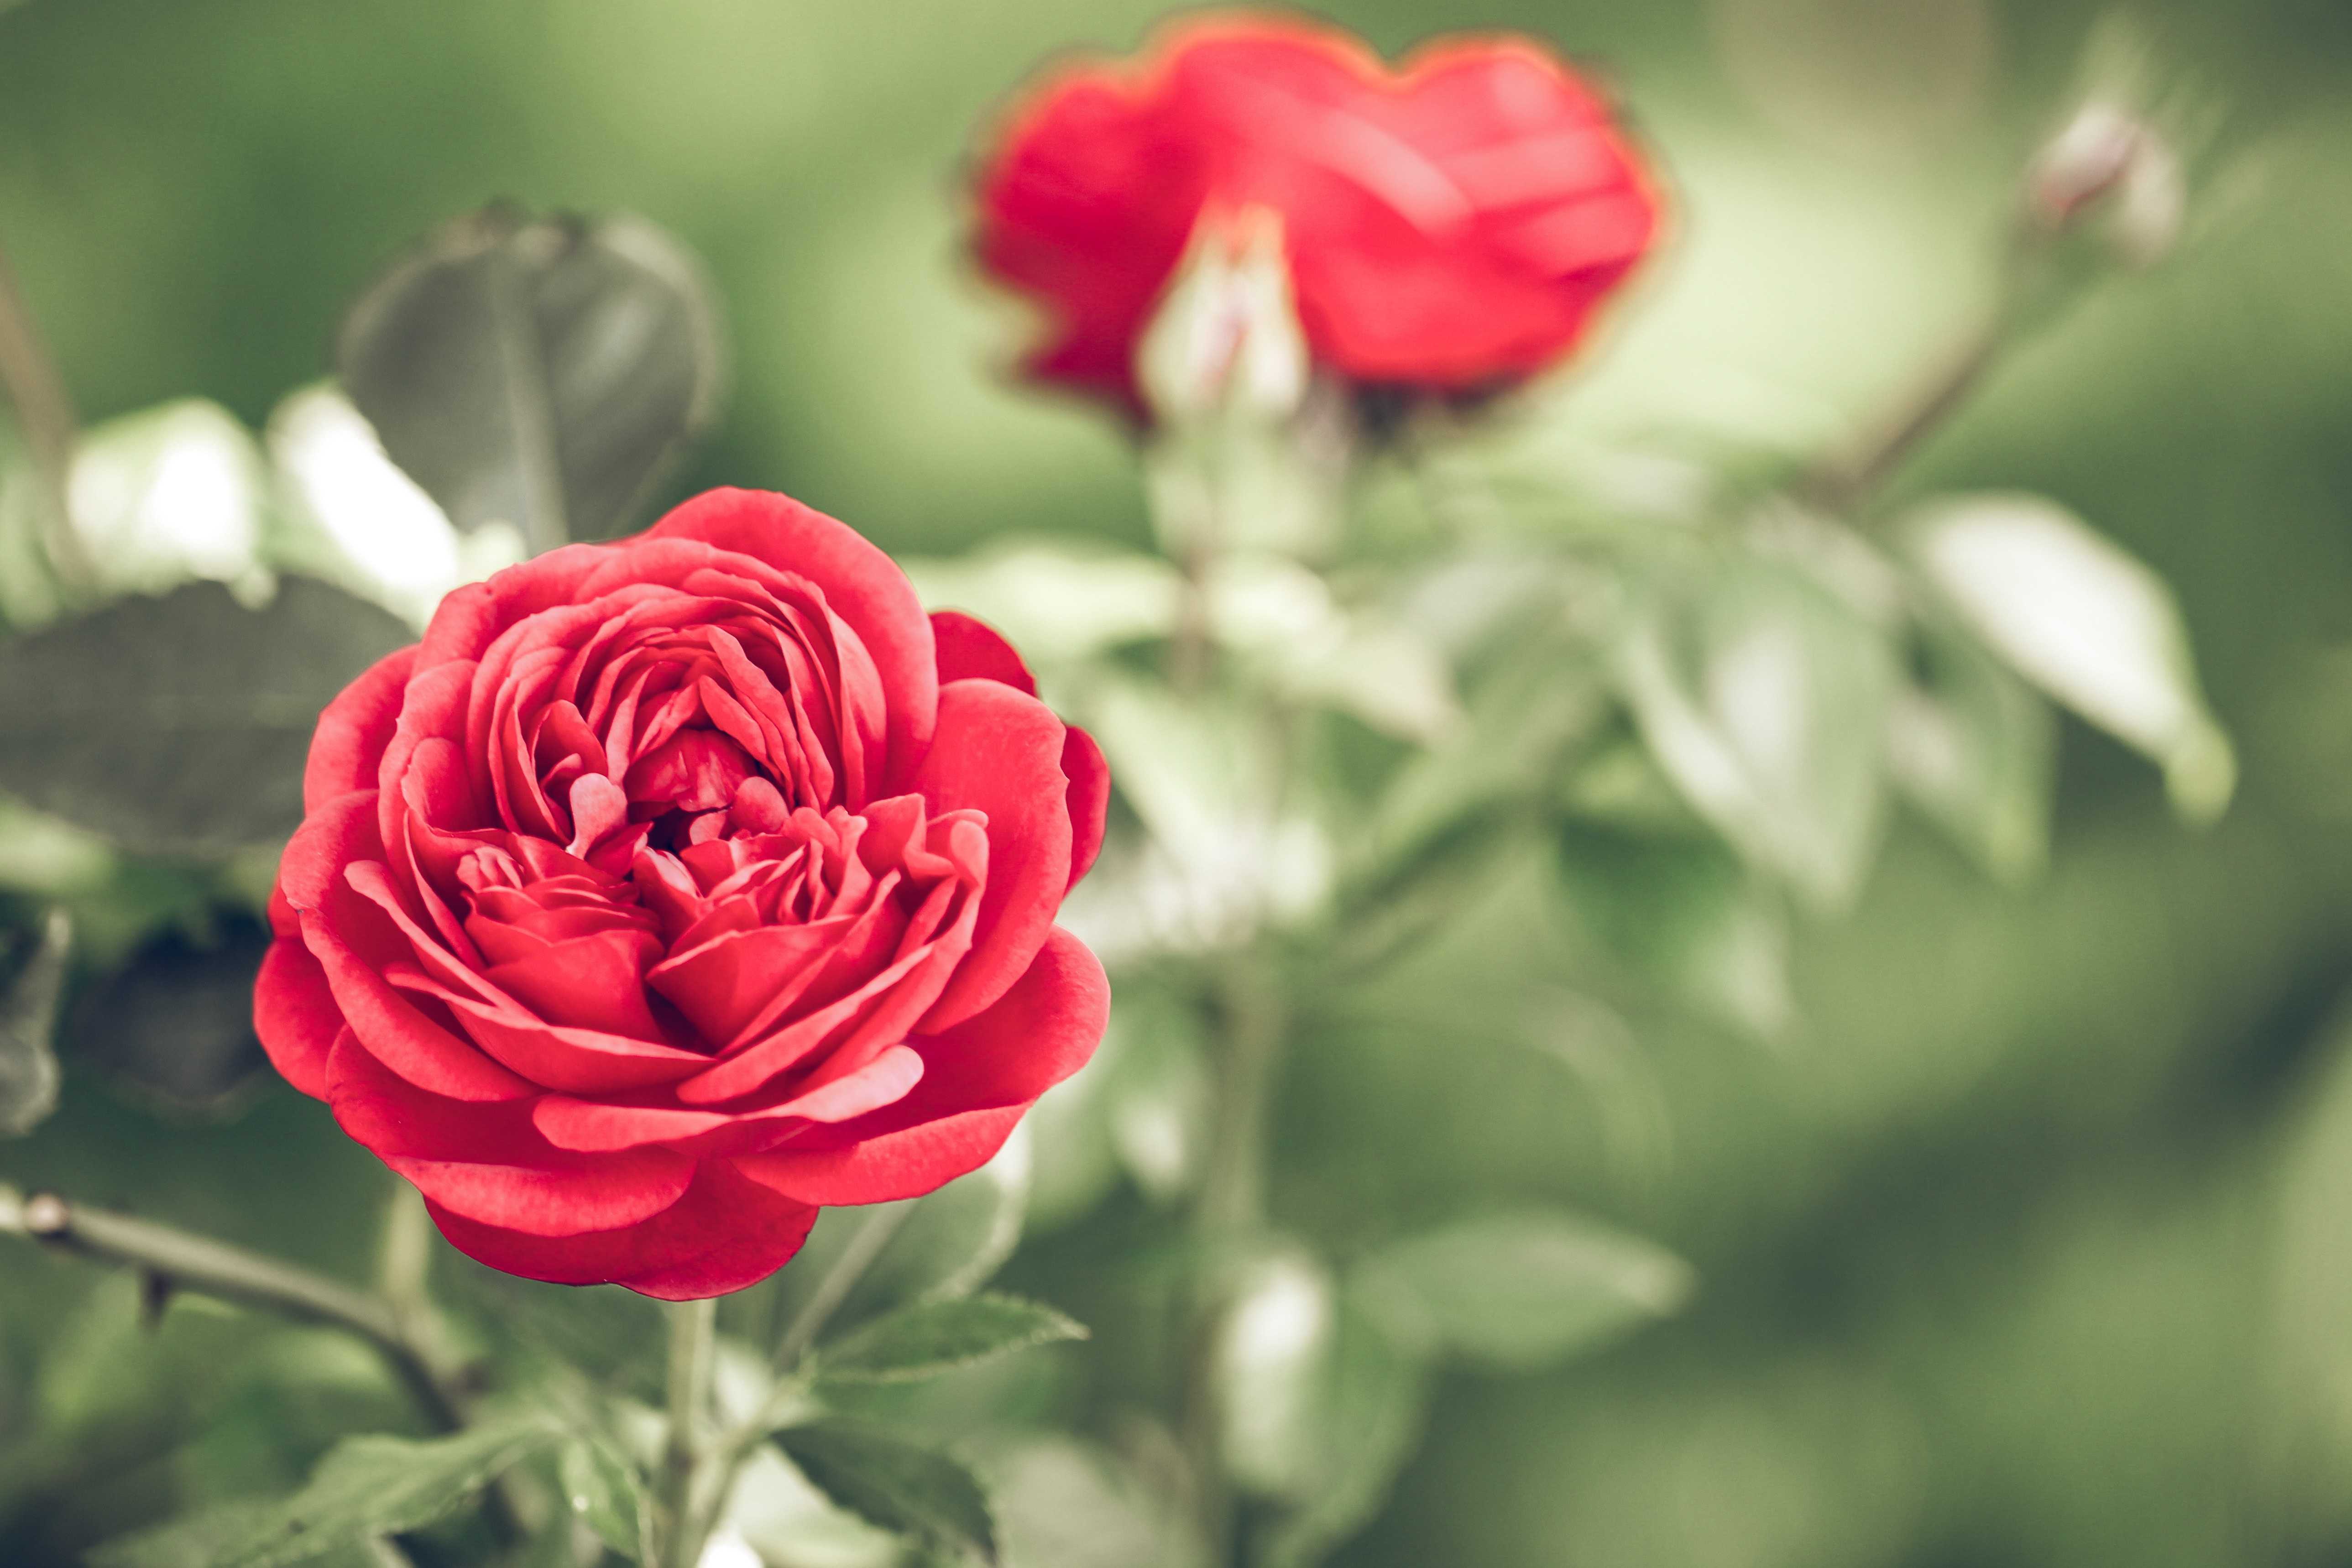 Rose Day Images 2019